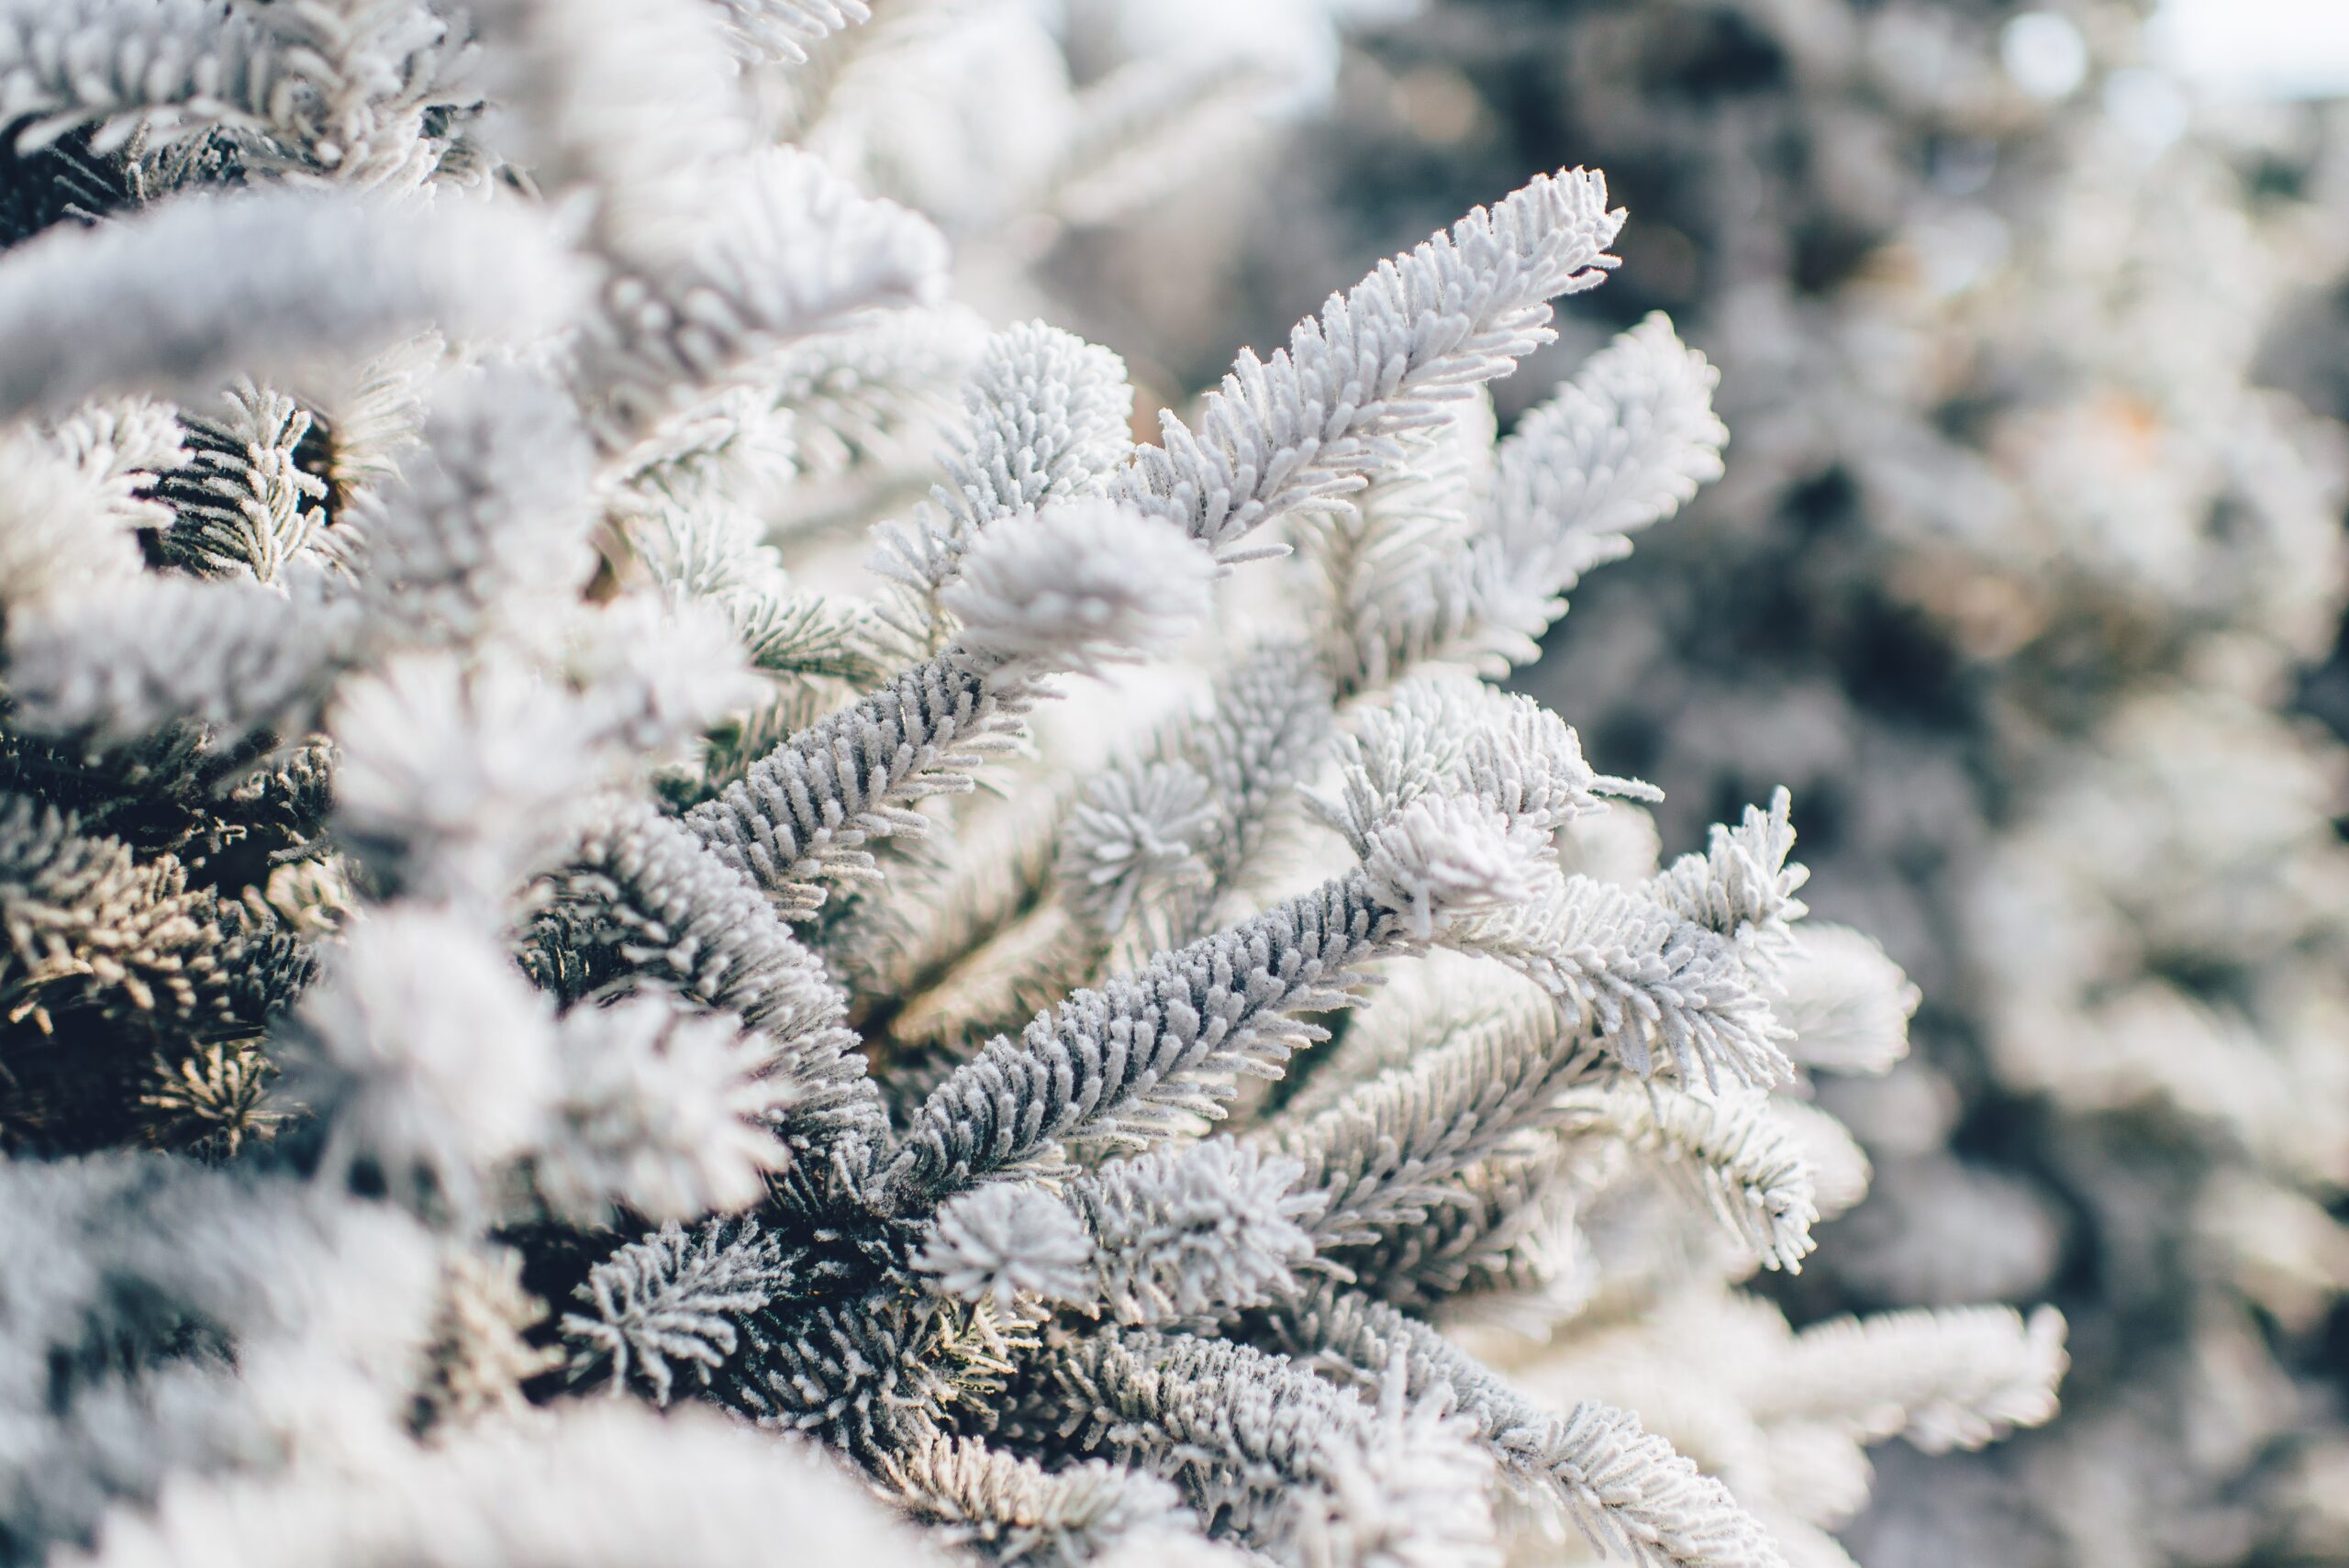 Create a Winter Wonderland with a snow Christmas tree theme. Pictured: A snowy Christmas tree.